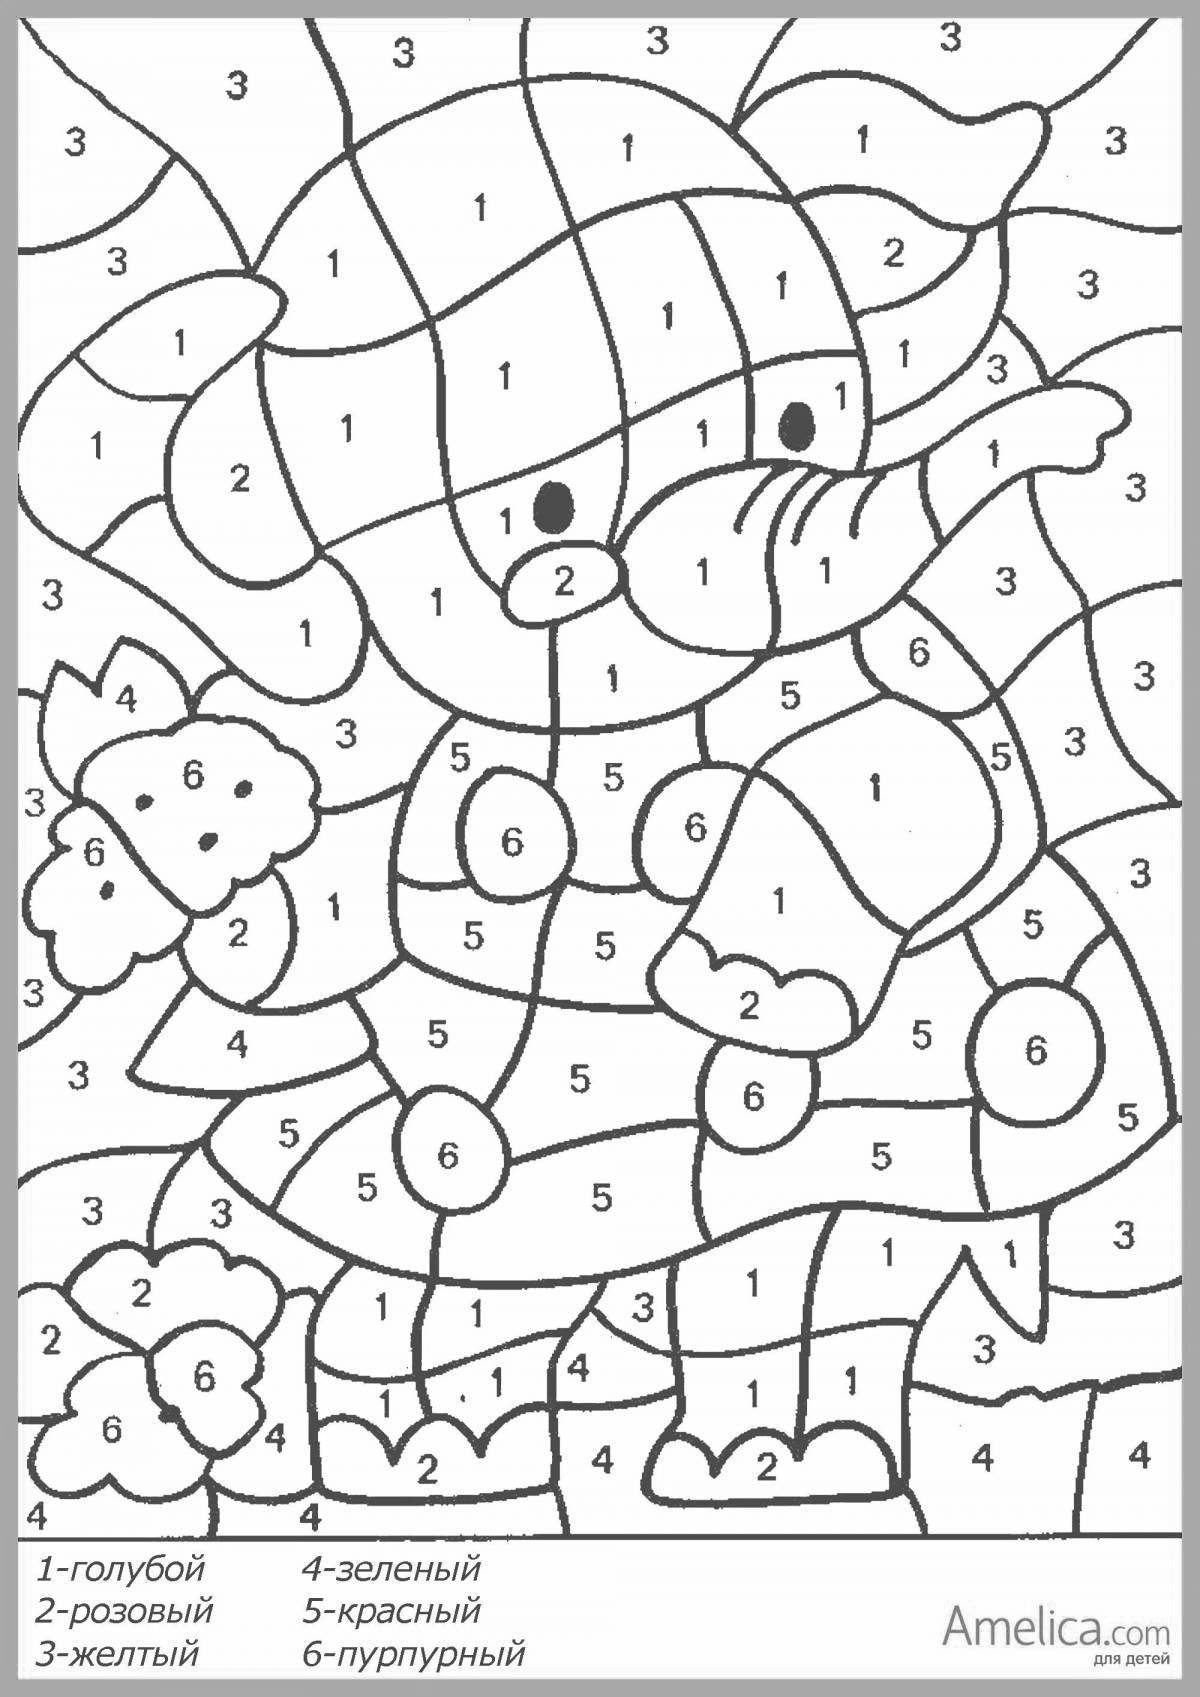 Fun coloring by numbers for kids 5 6